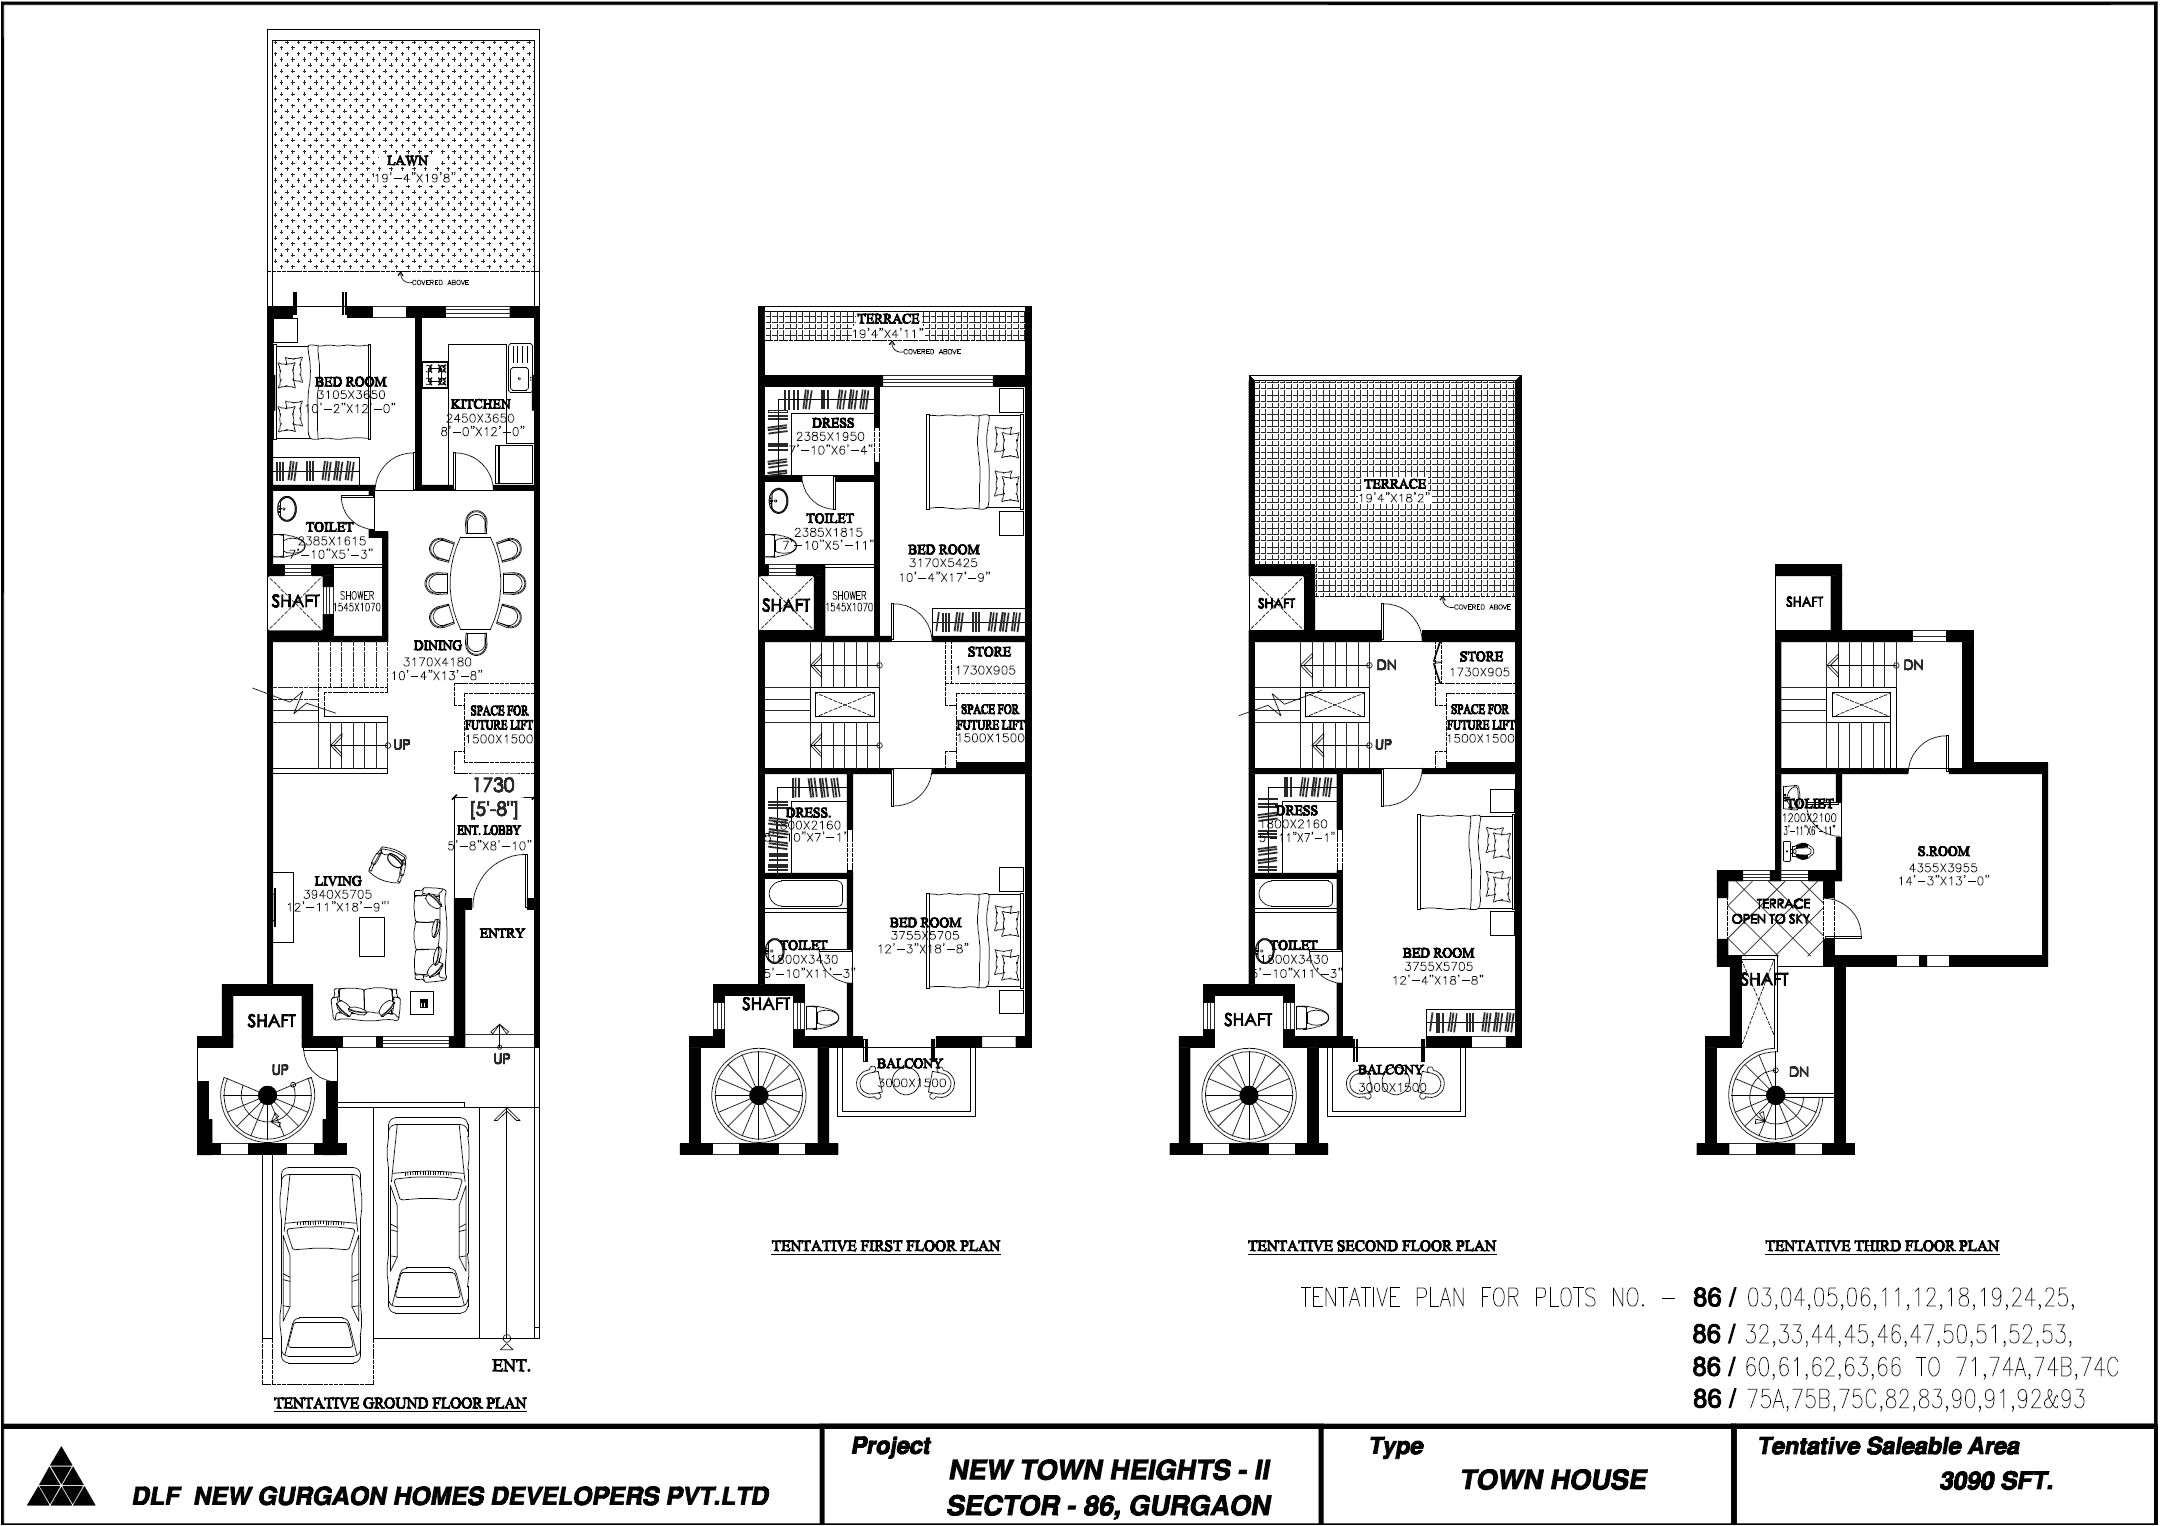 Row Home Floor Plans Baltimore Row House Floor Plan Quotes Home Building